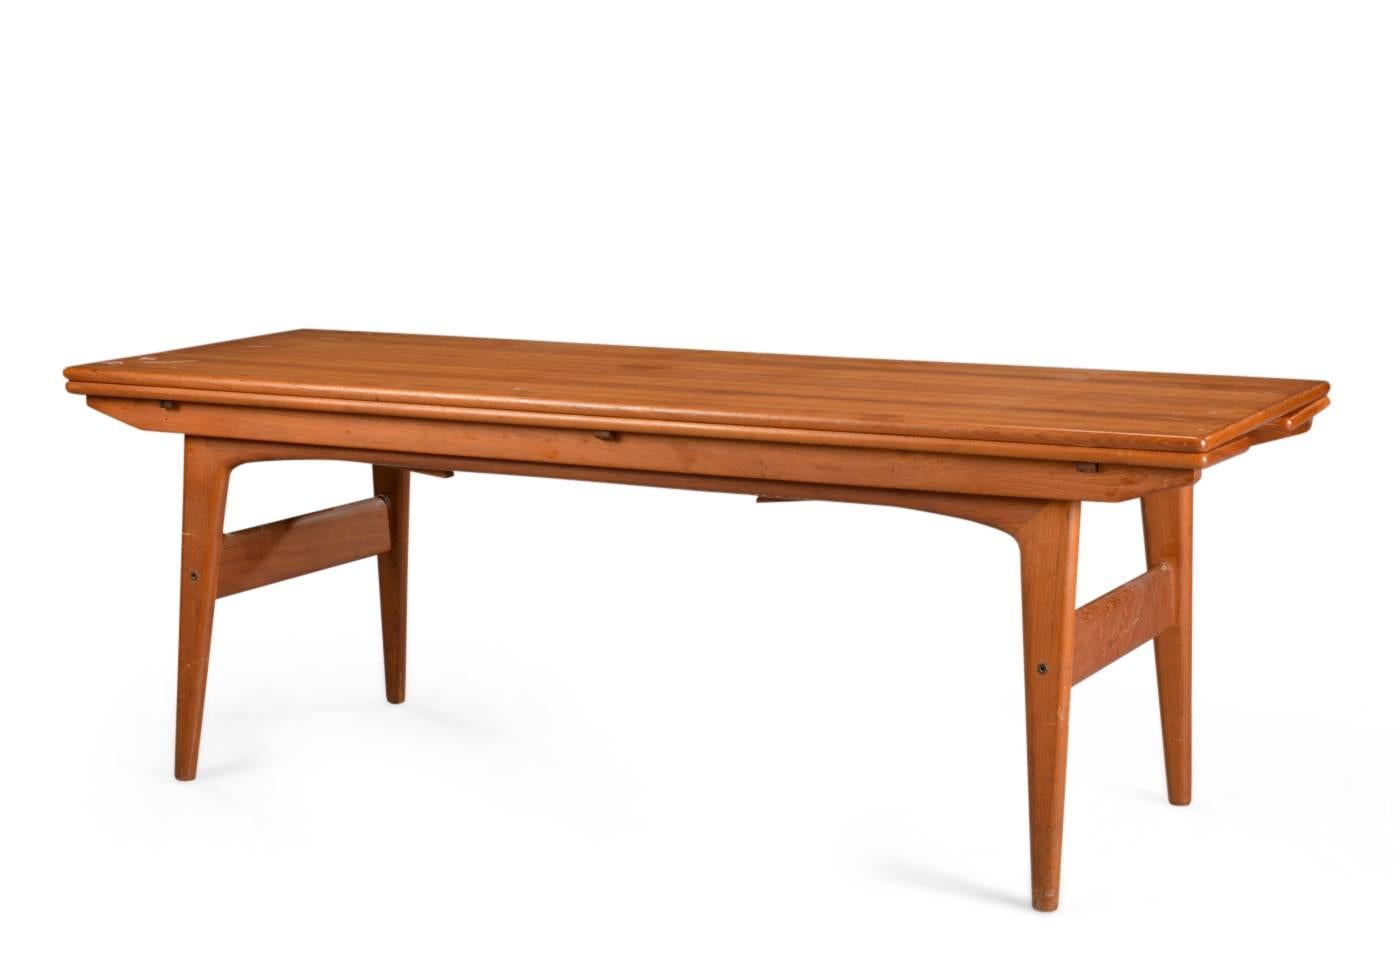 Coffee table in solid and thin teak wood, height adjustable. Danish furniture manufacturer.
Measures: H. 55/72, B. 54/90, L. 150 cm.
Slight signs of wear, scratches.